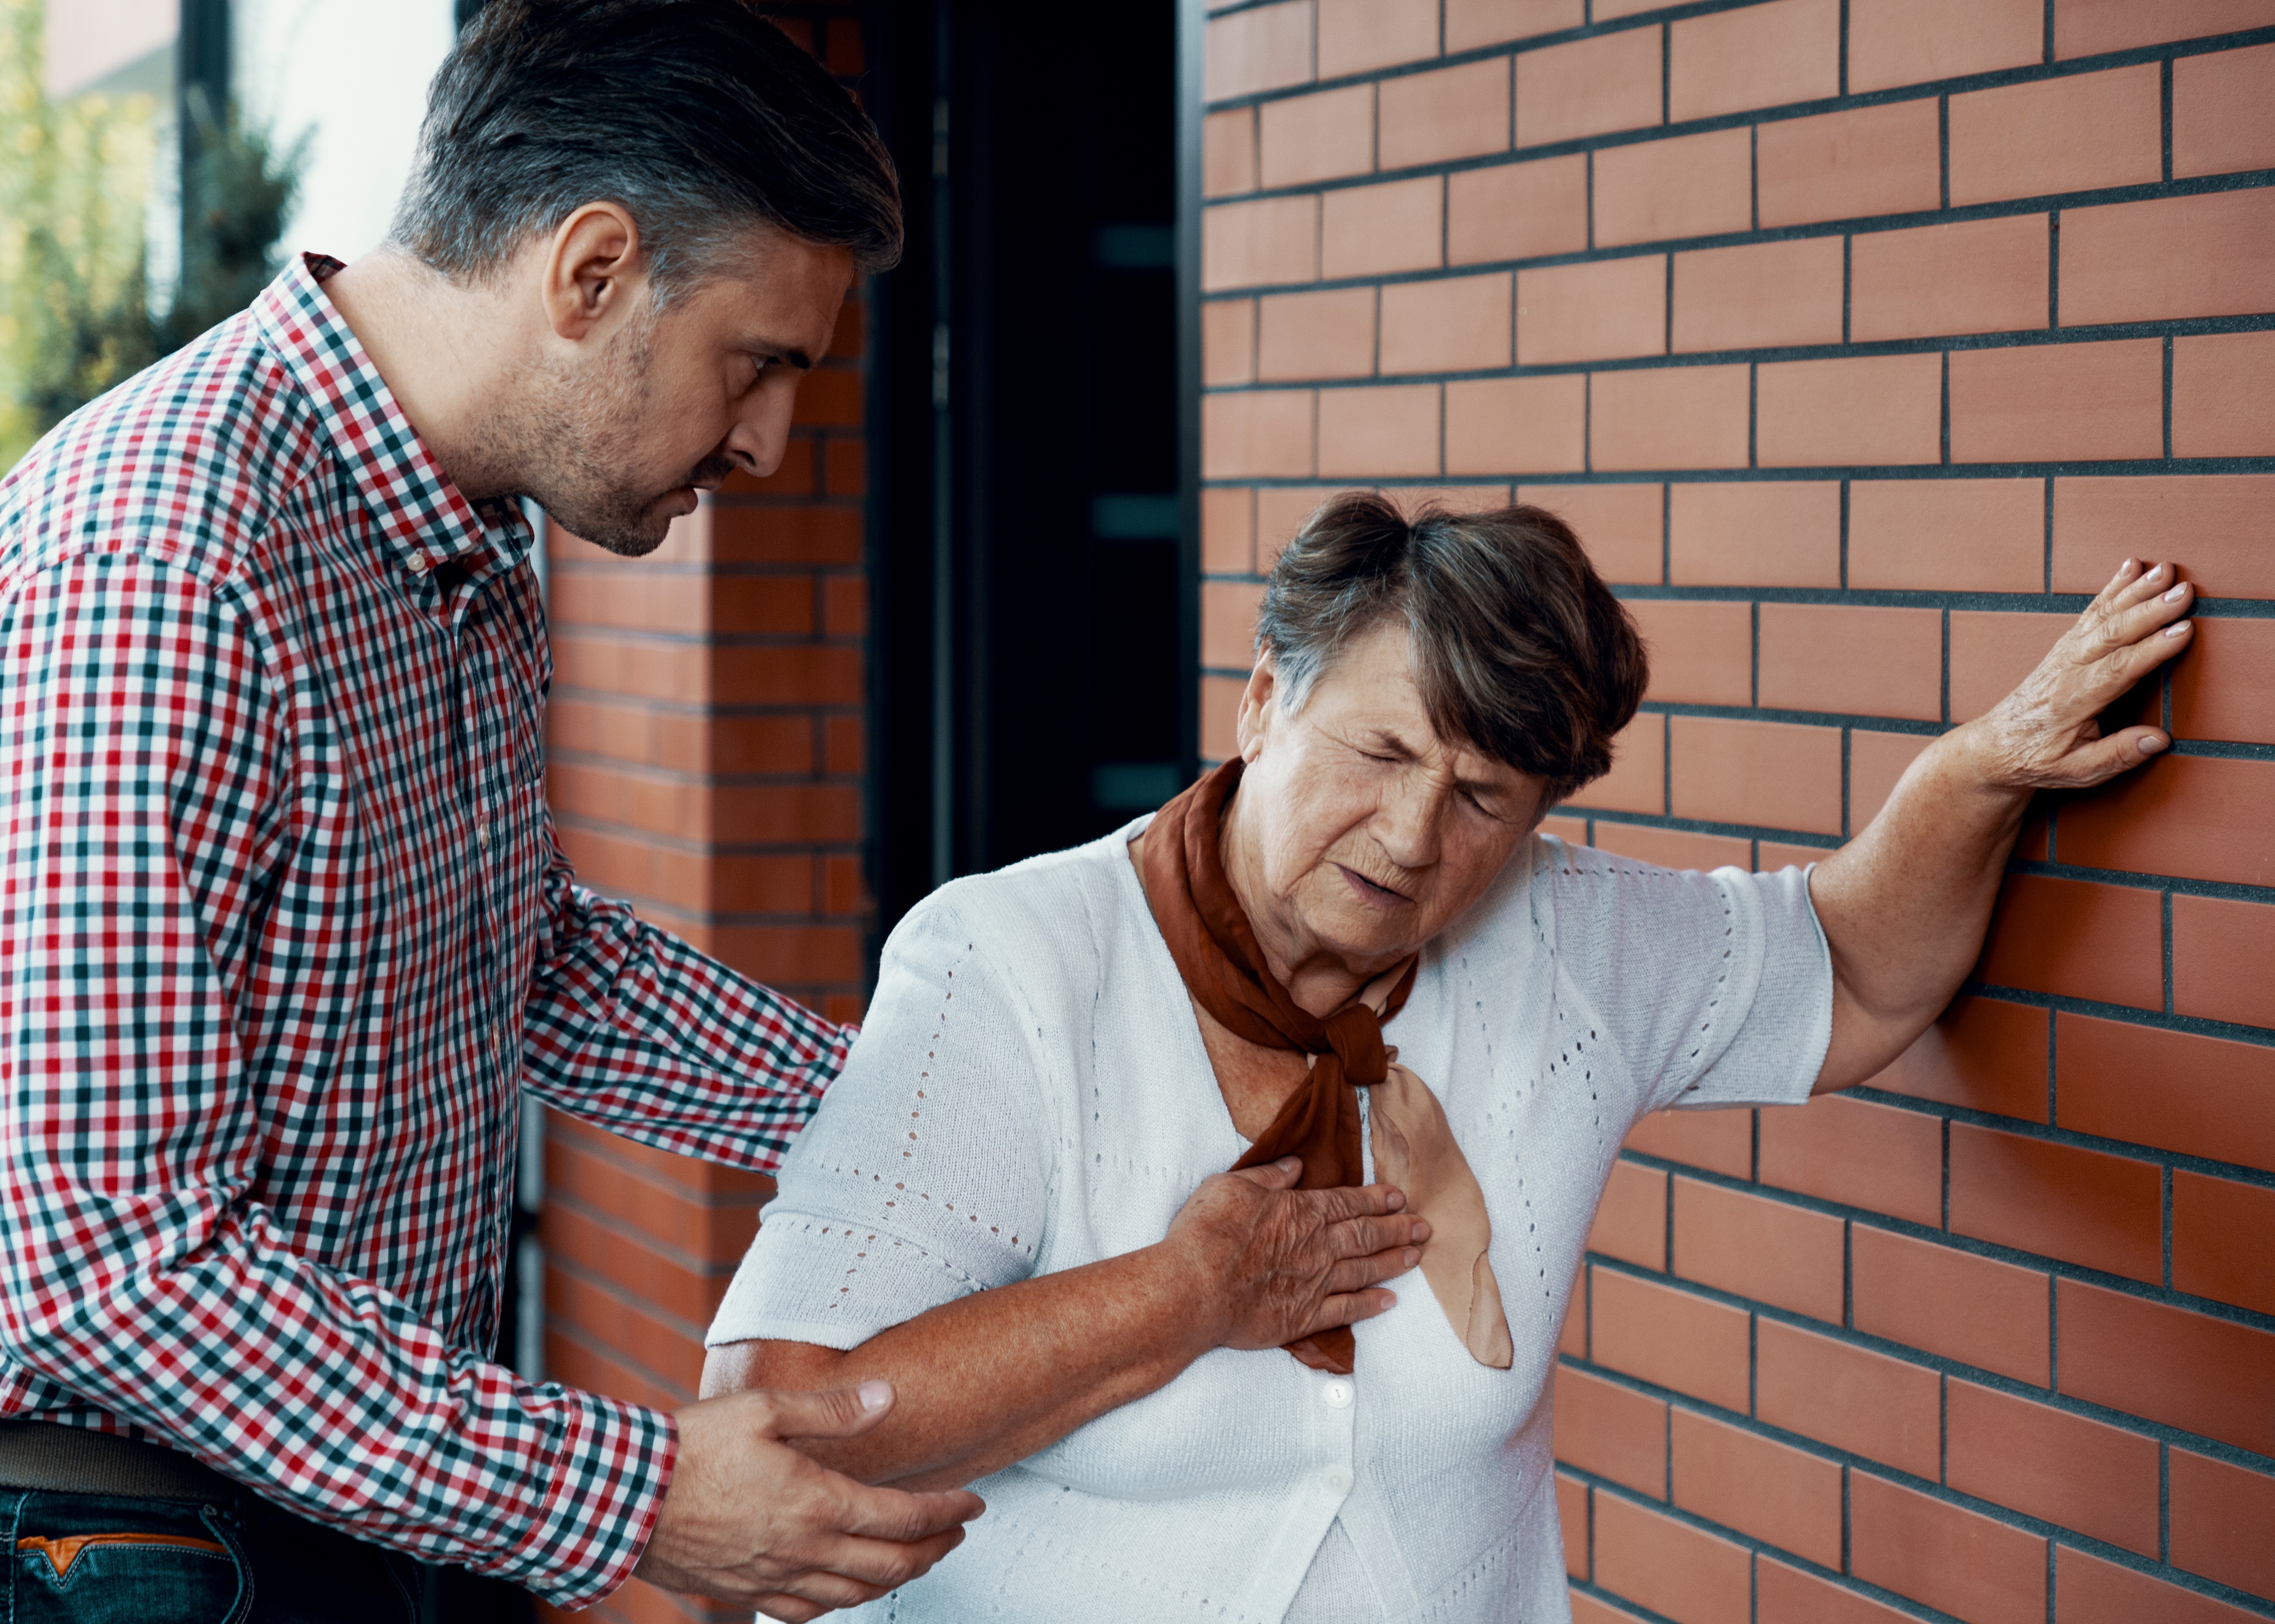 A man helping an older woman tie her neck tie.